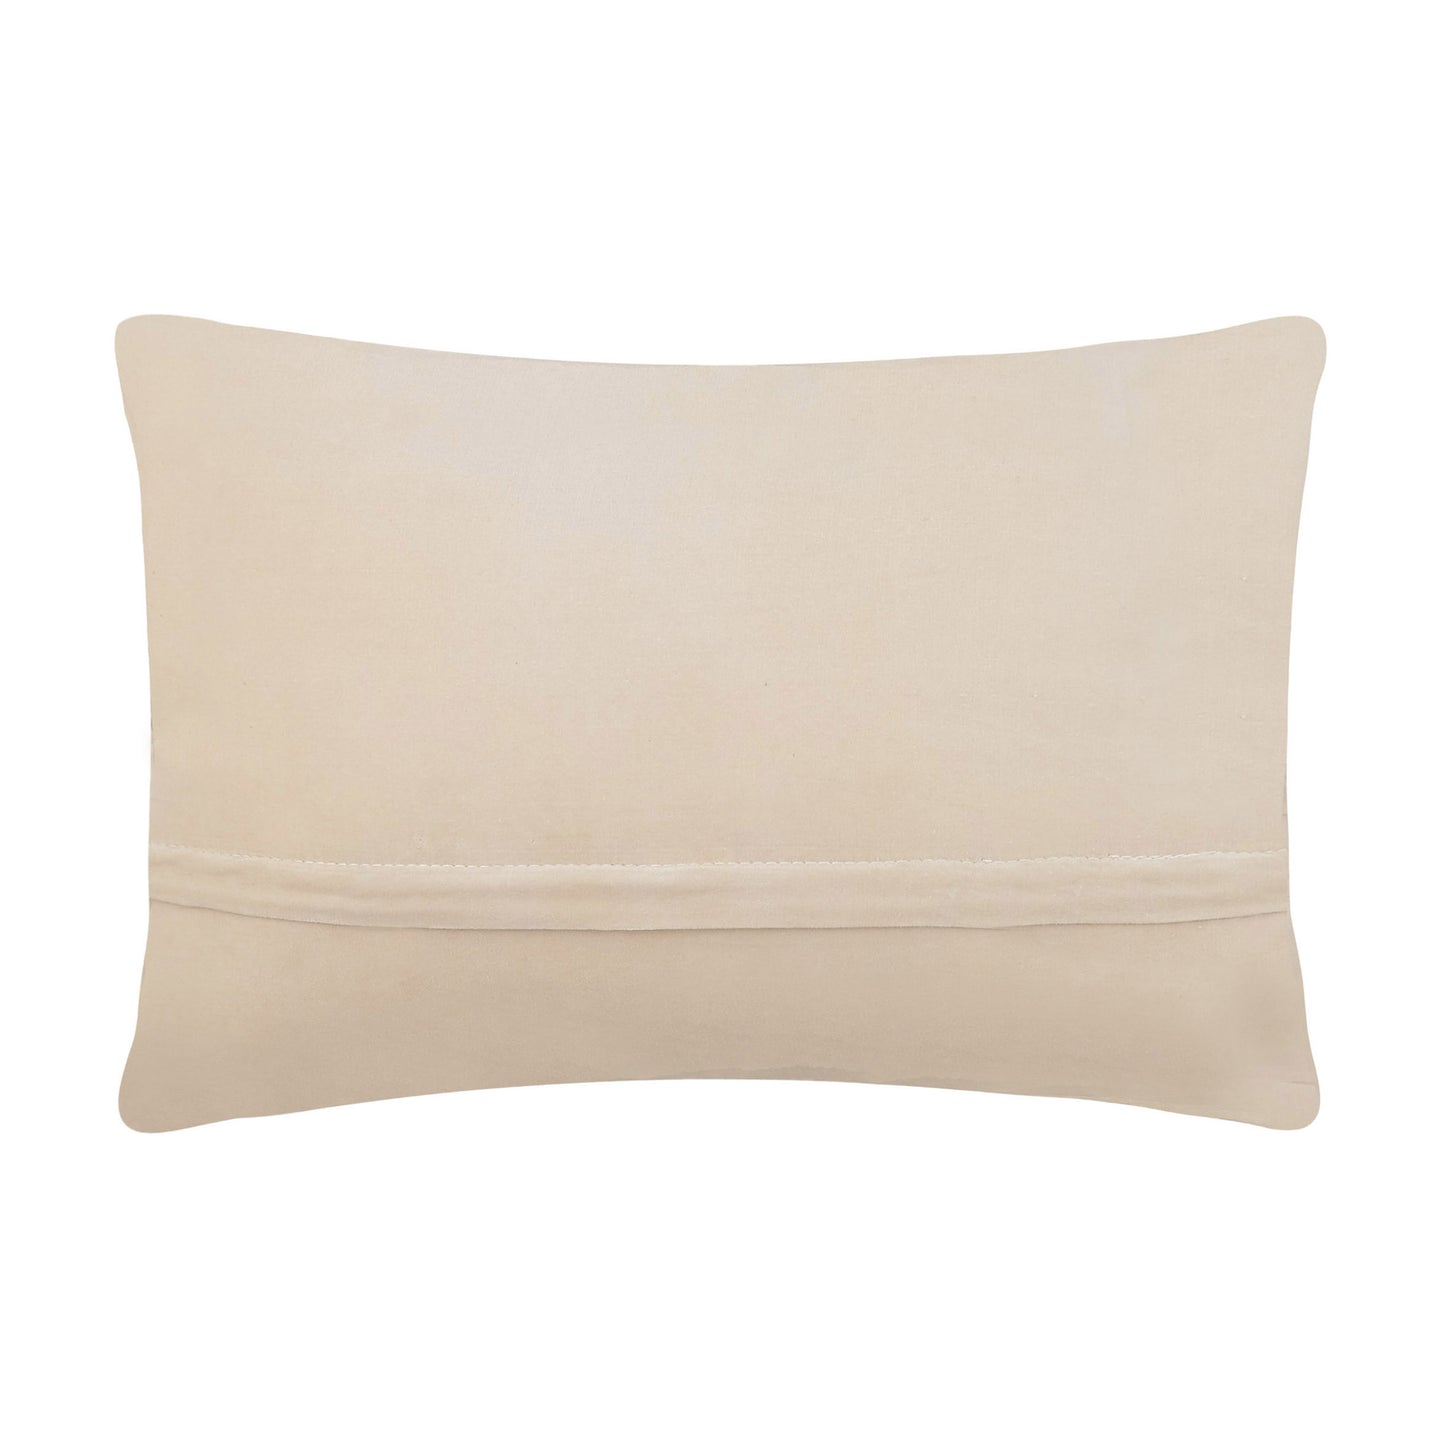 Green Whale Hook Pillow 12X18 – Smyth Jewelers